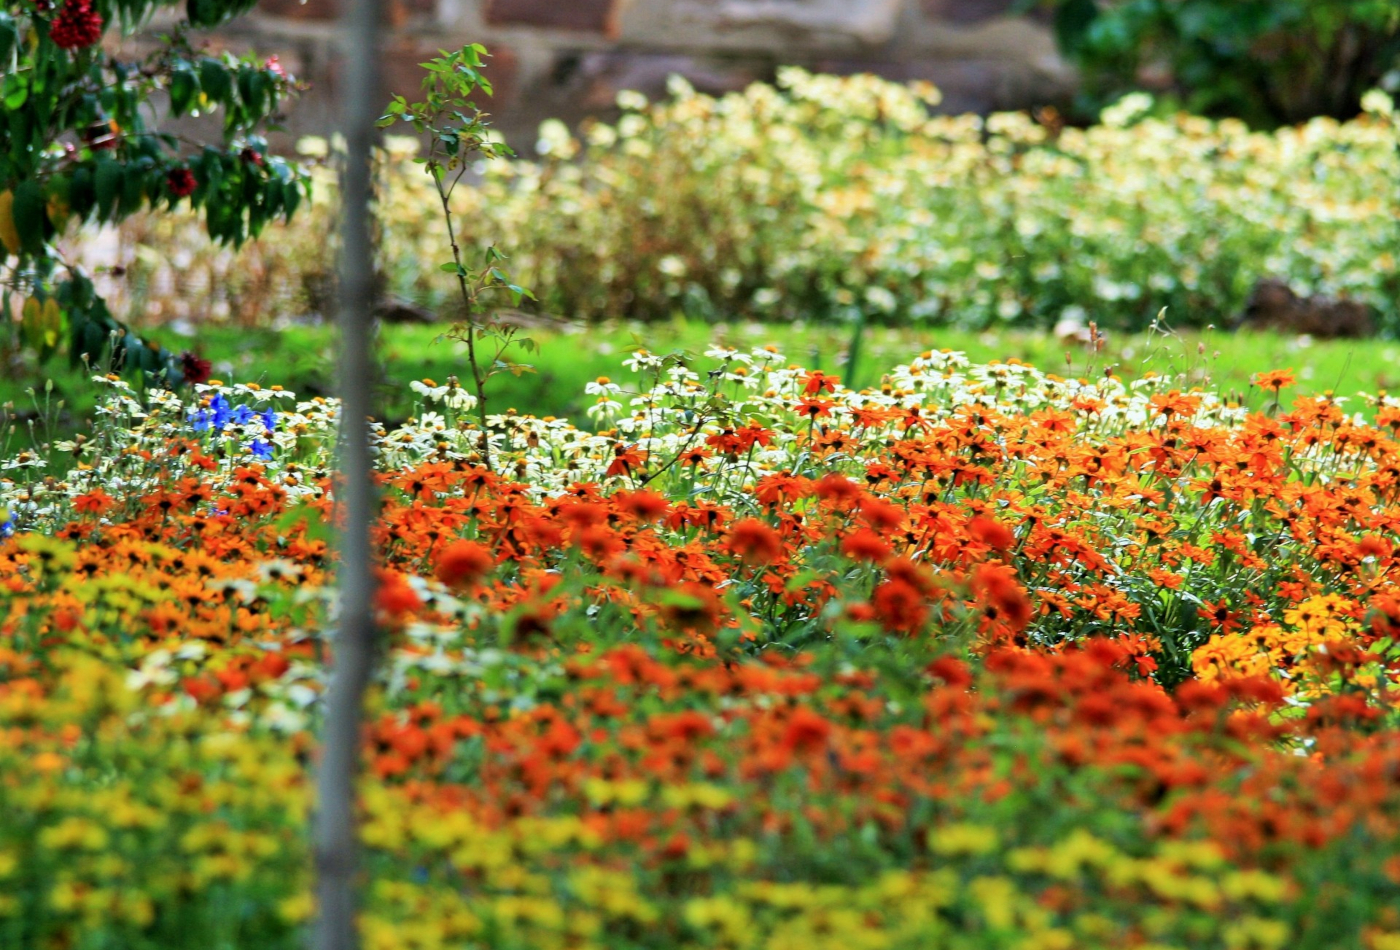 Yellow orange and white flowers decorating a garden